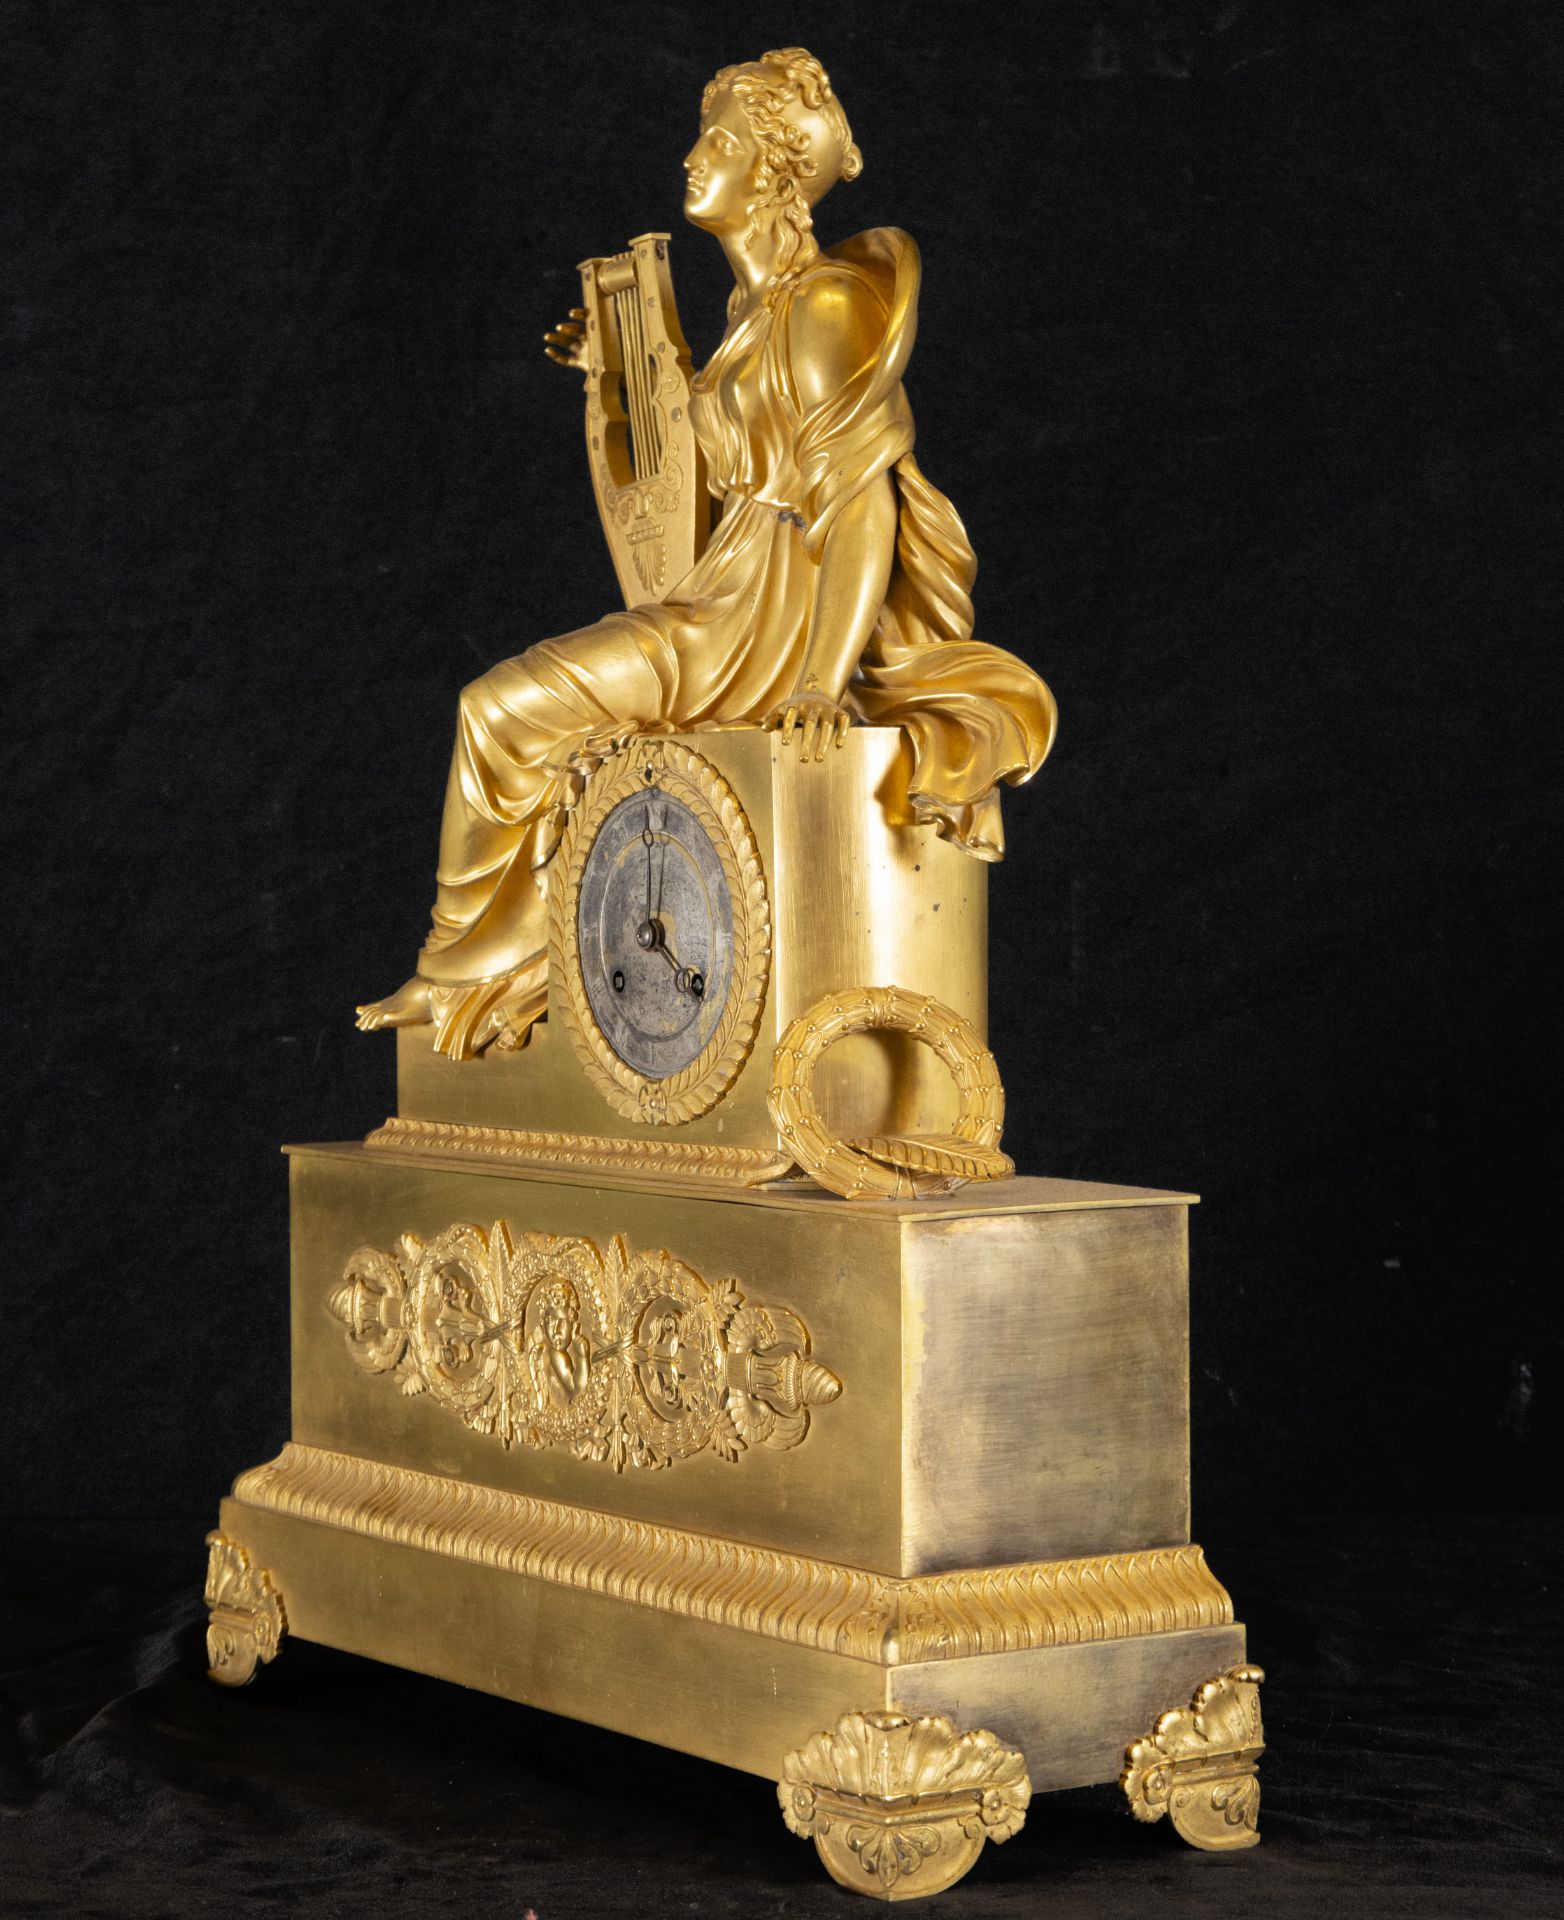 Important French Empire period table clock, early 19th century, in mercury gilt bronze - Image 3 of 6